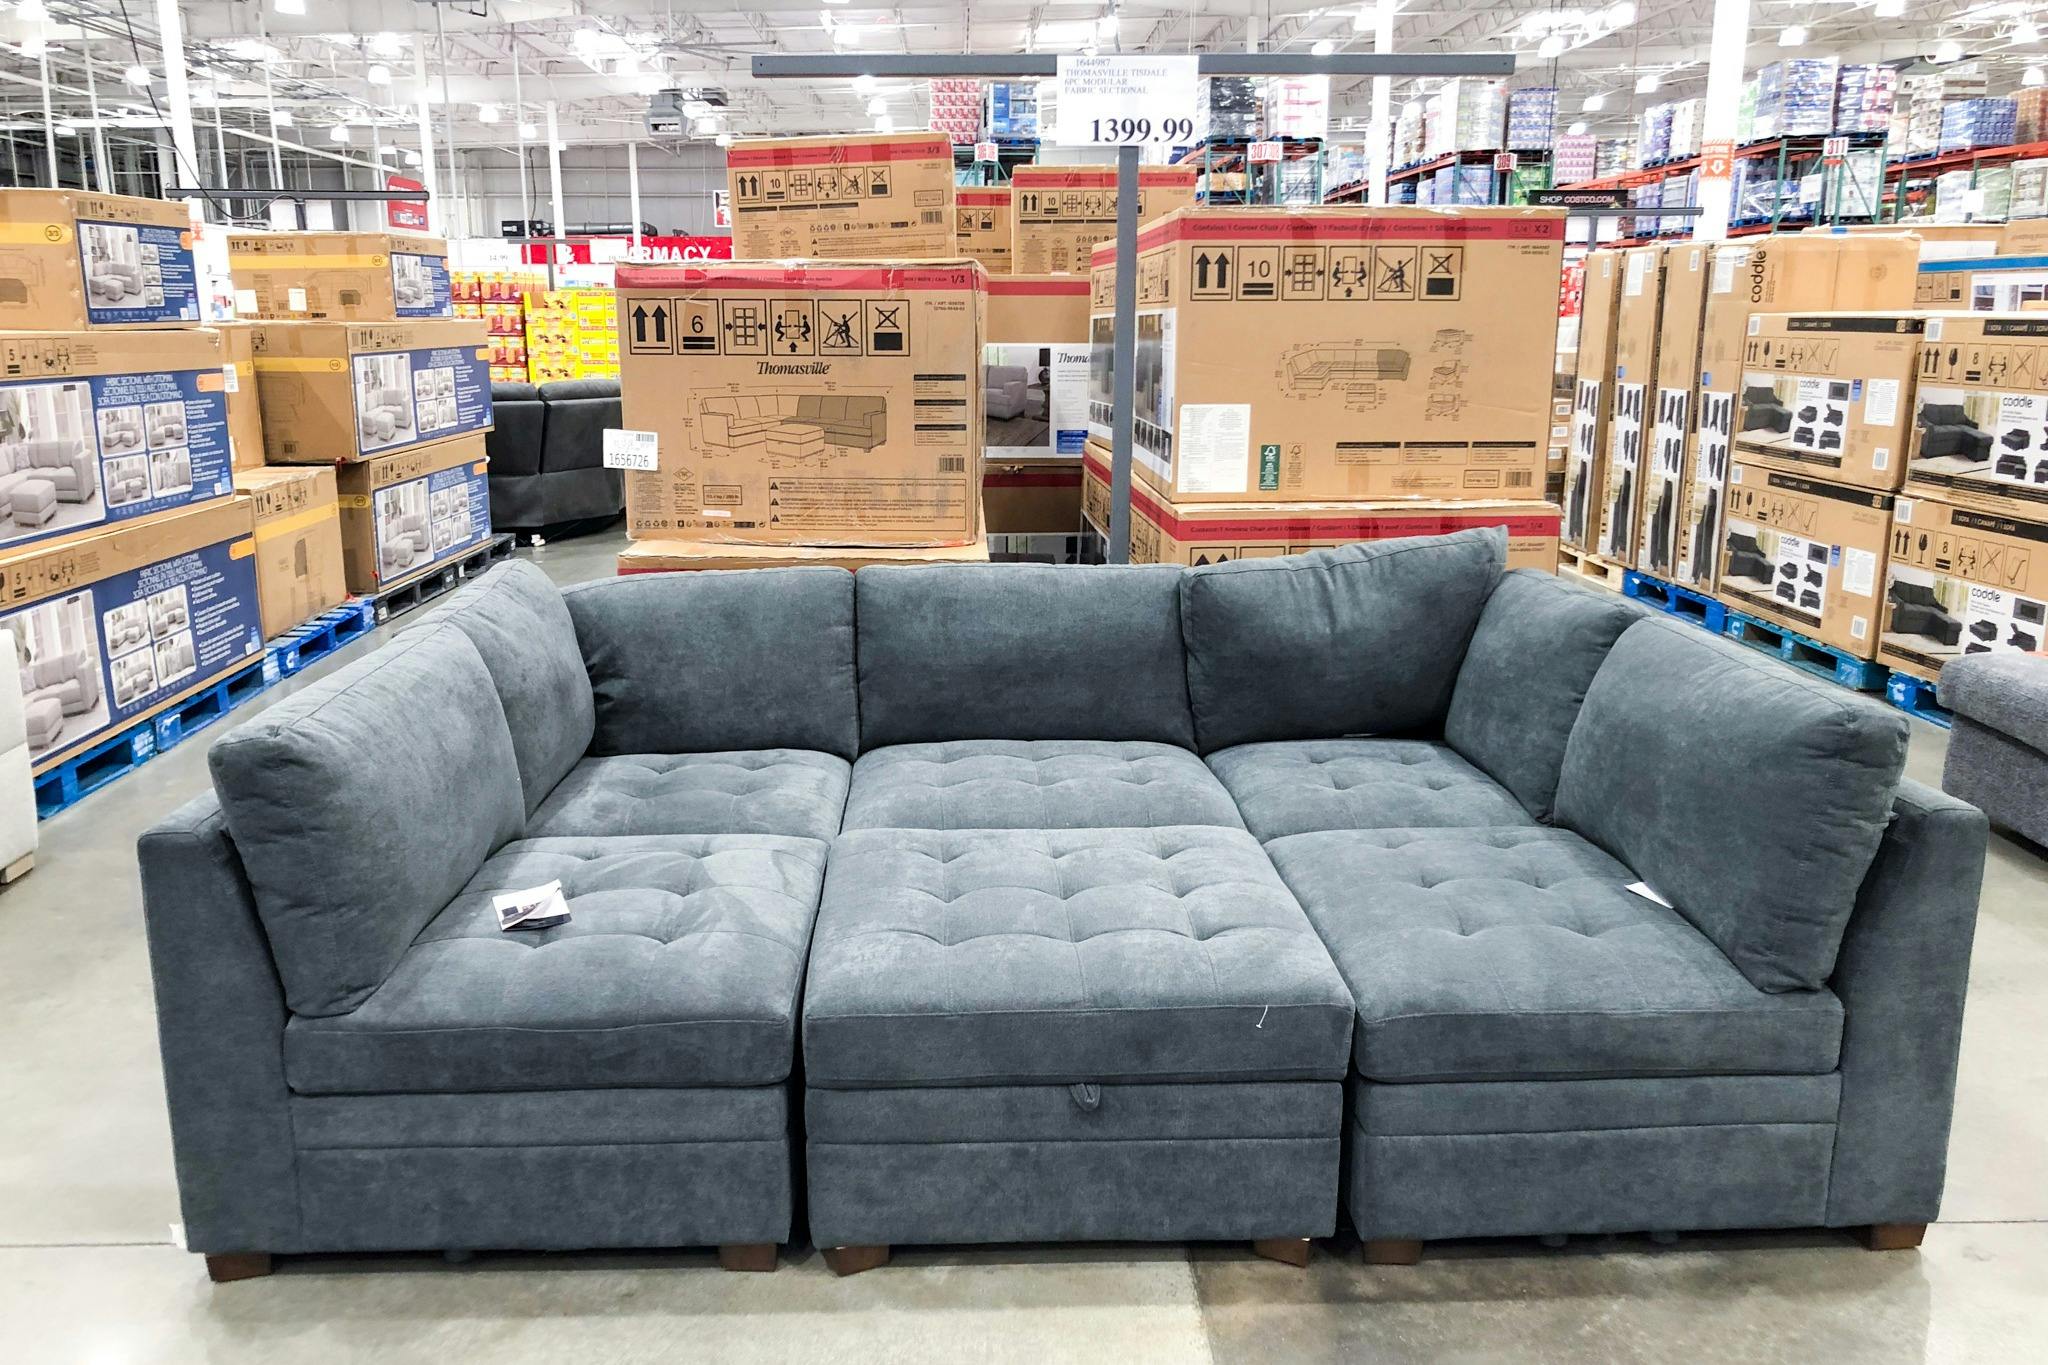 It’s Furniture Month at Costco: Newly Stocked Sectionals, Beds, and ...